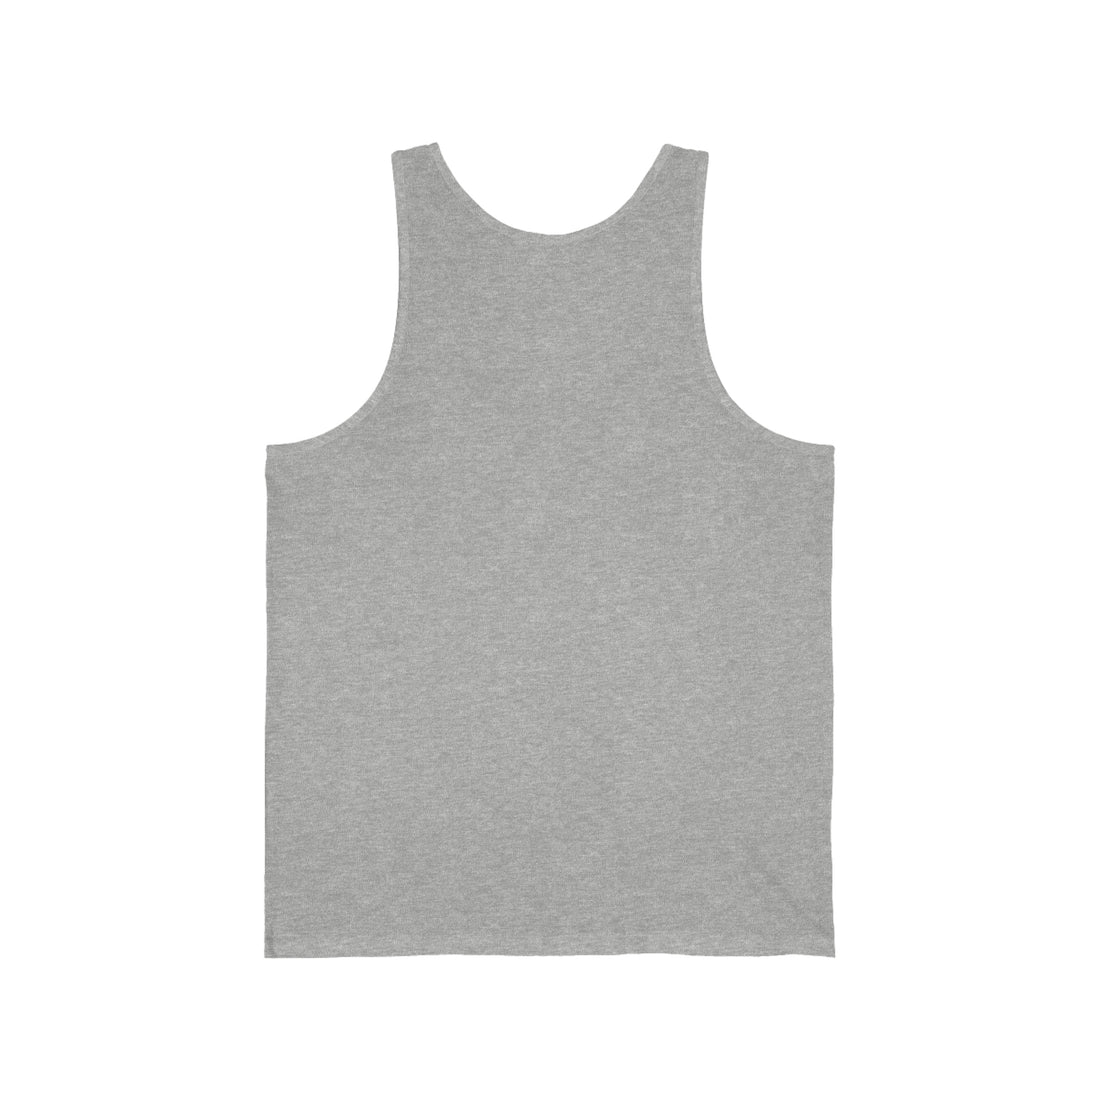 Plays Well With Dog   - Unisex Jersey Tank Top